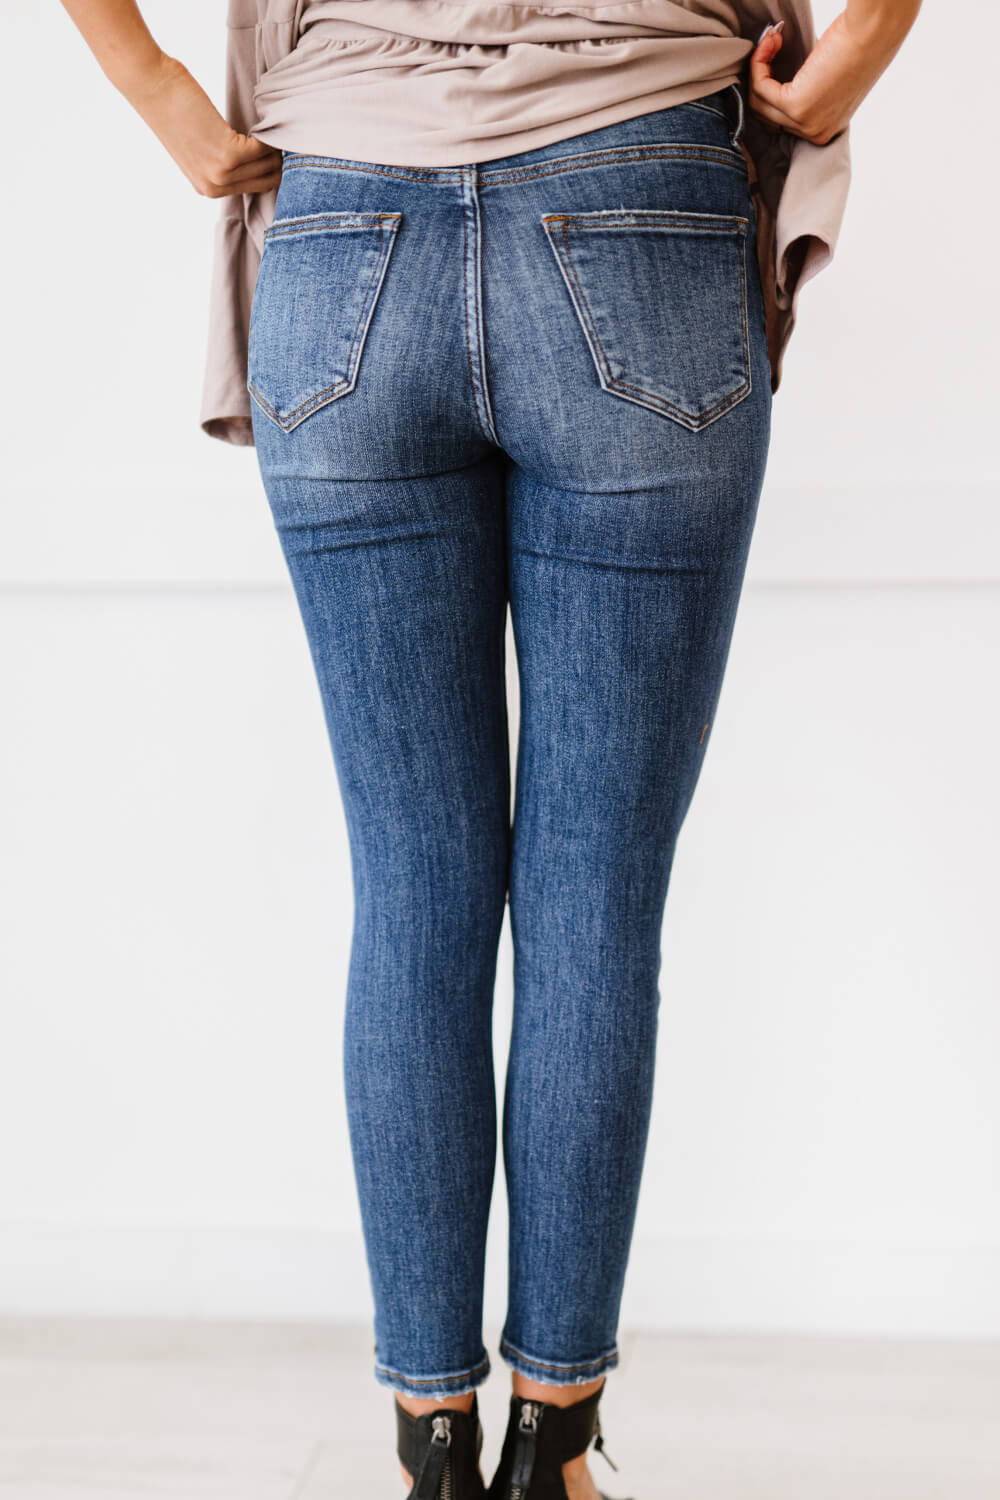 RISEN Amber Full Size Run High-Waisted Distressed Skinny Jeans